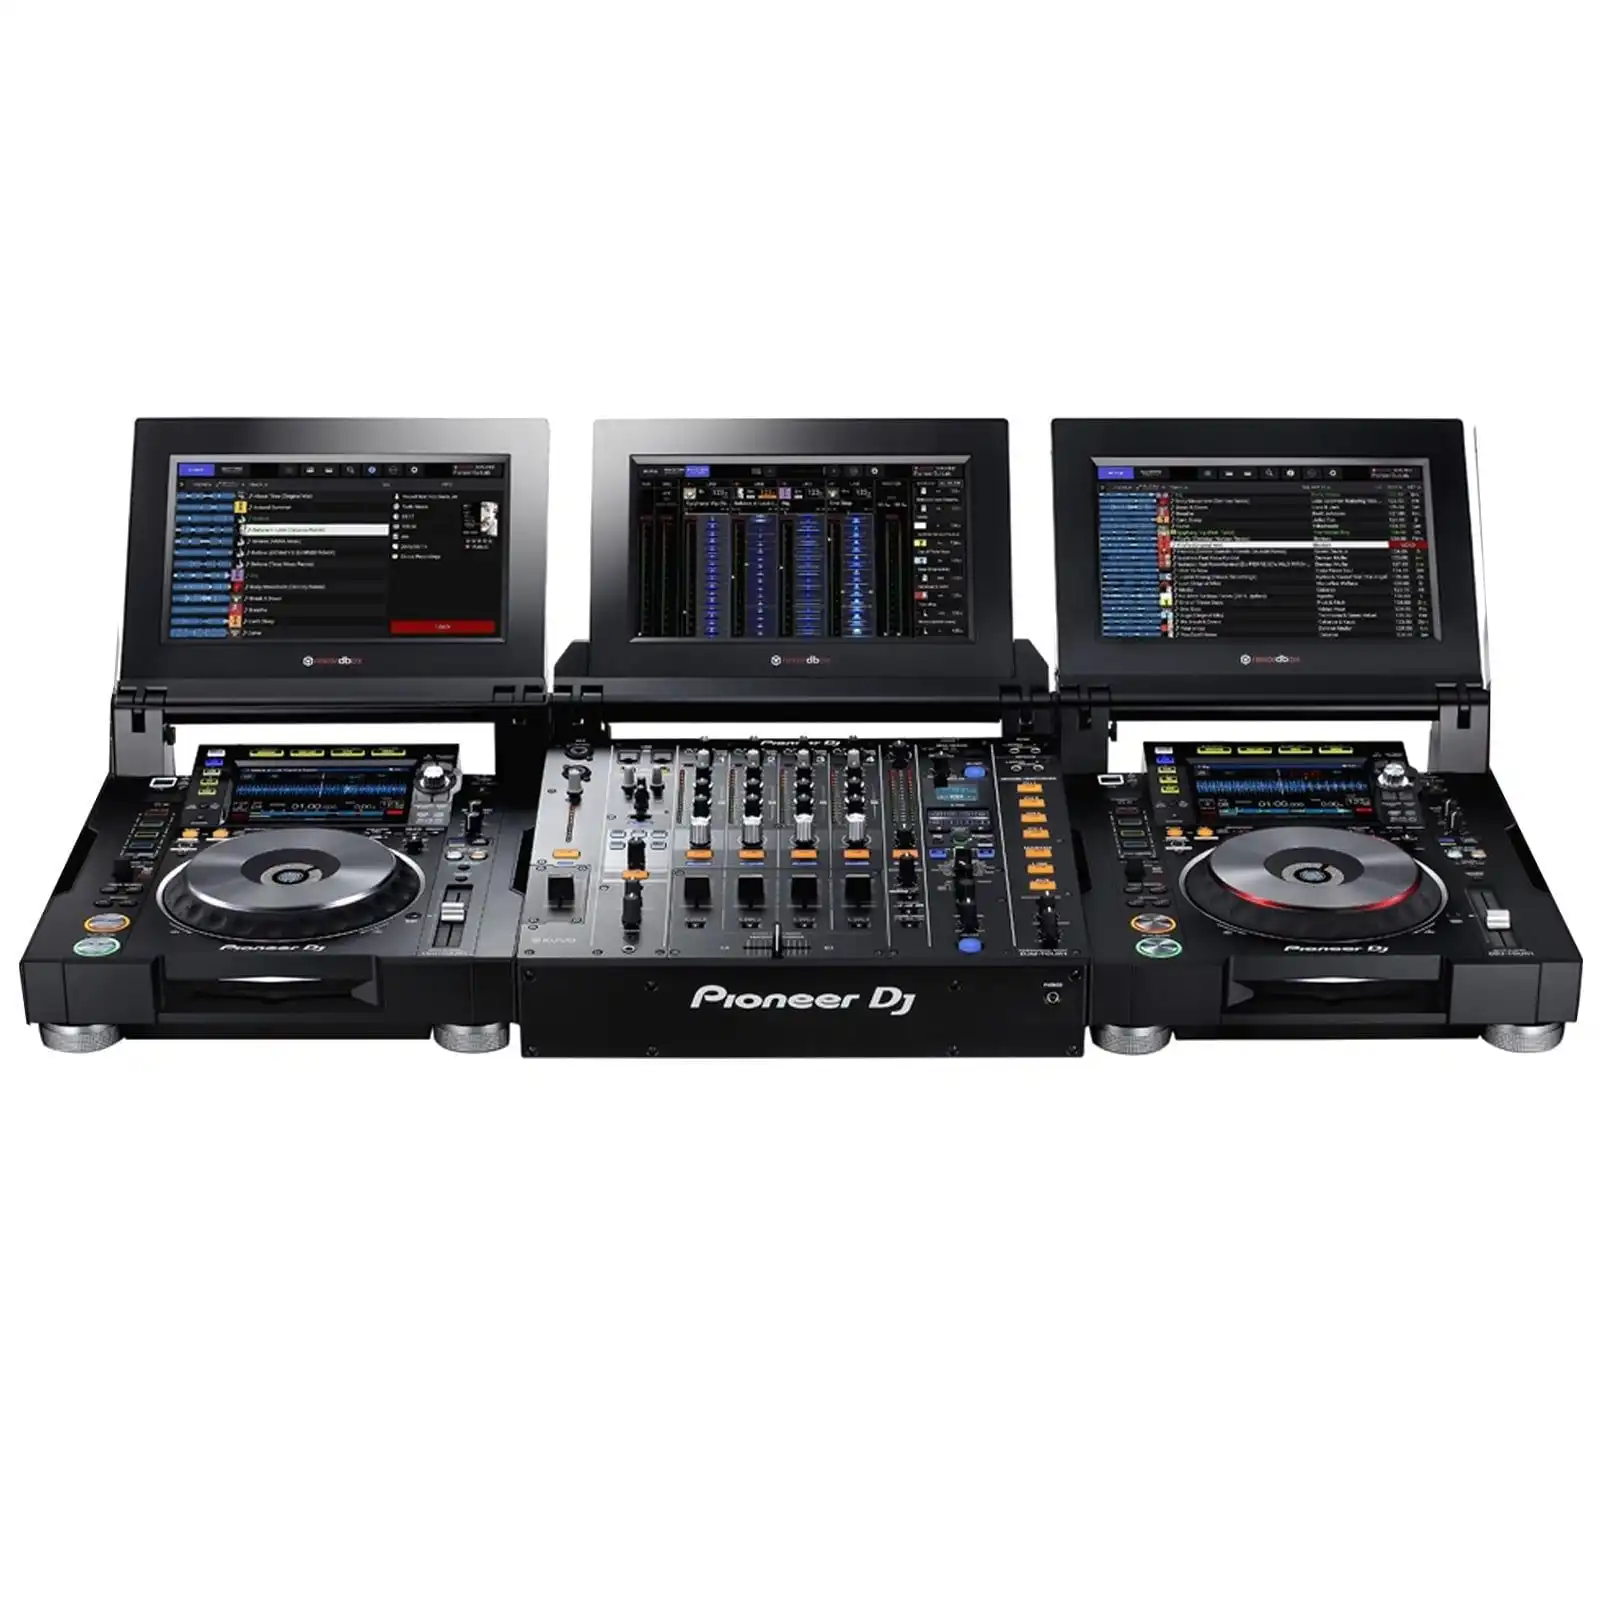 

HOT SALES P-ioneer CDJ-3000 (x2) + DJM-900 NXS2 & Cable Fast selling and On Discount